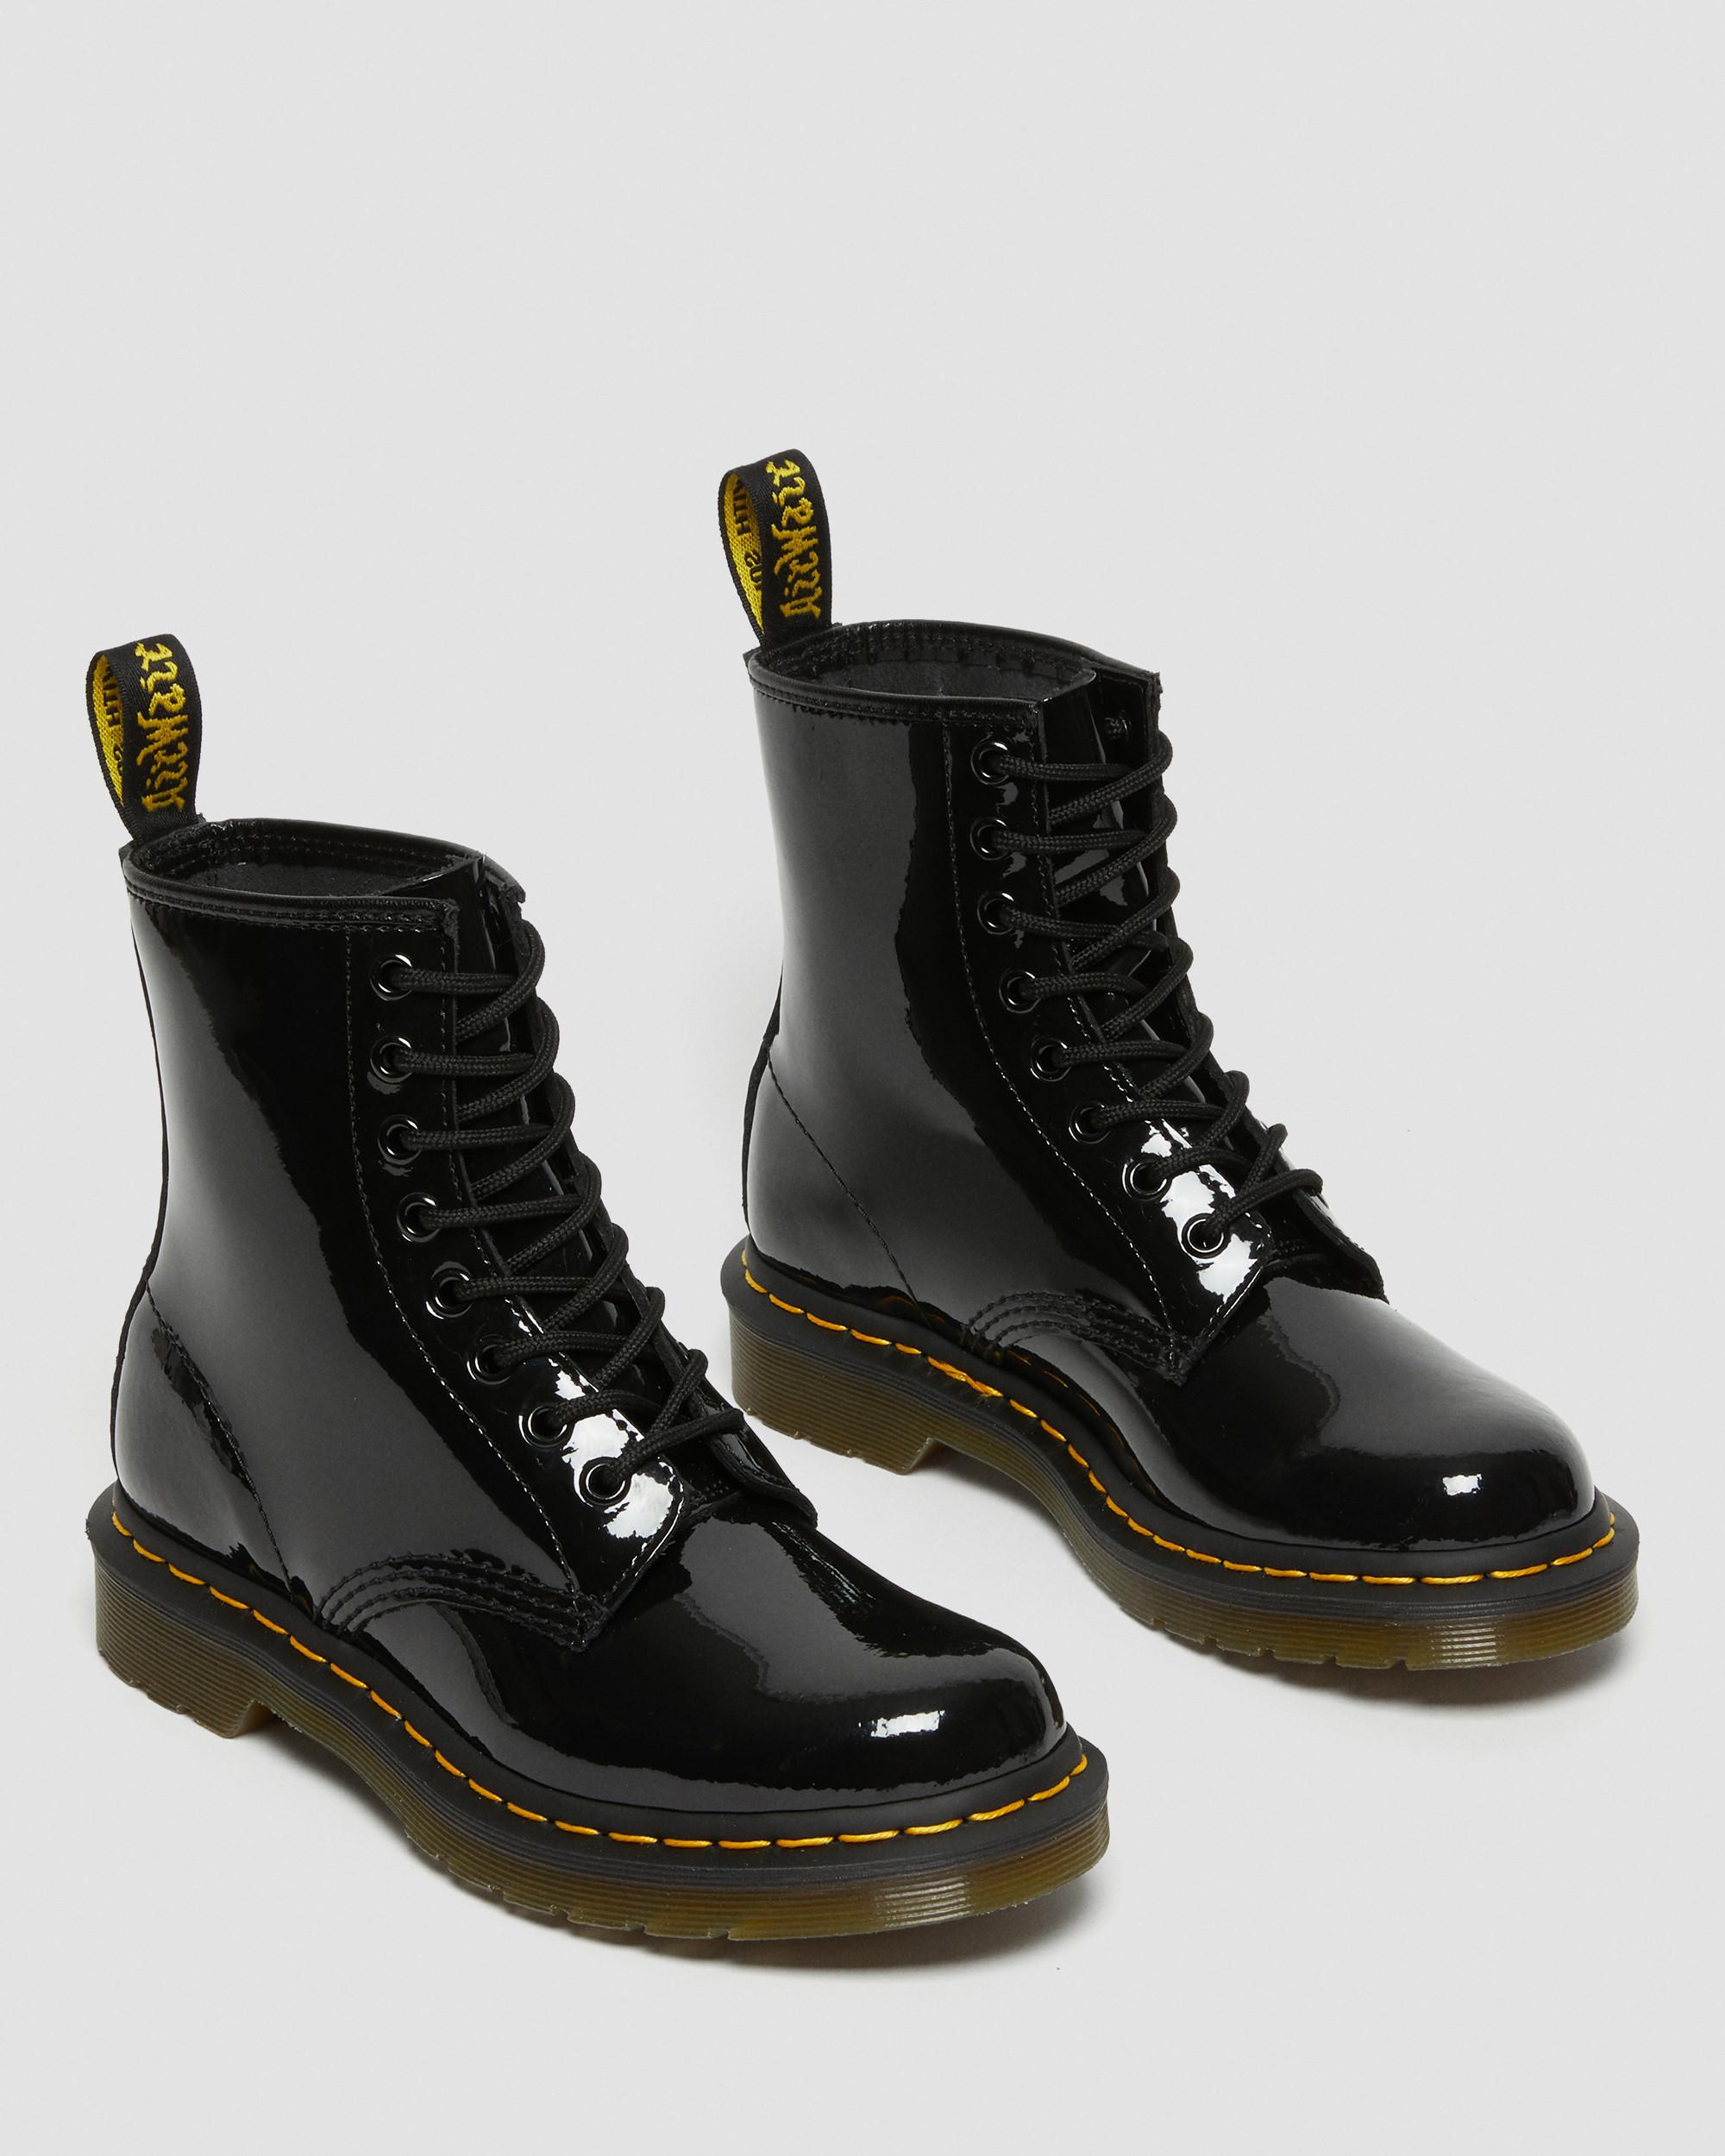 PATENT LEATHER LACE UP BOOTS | Dr. Martens